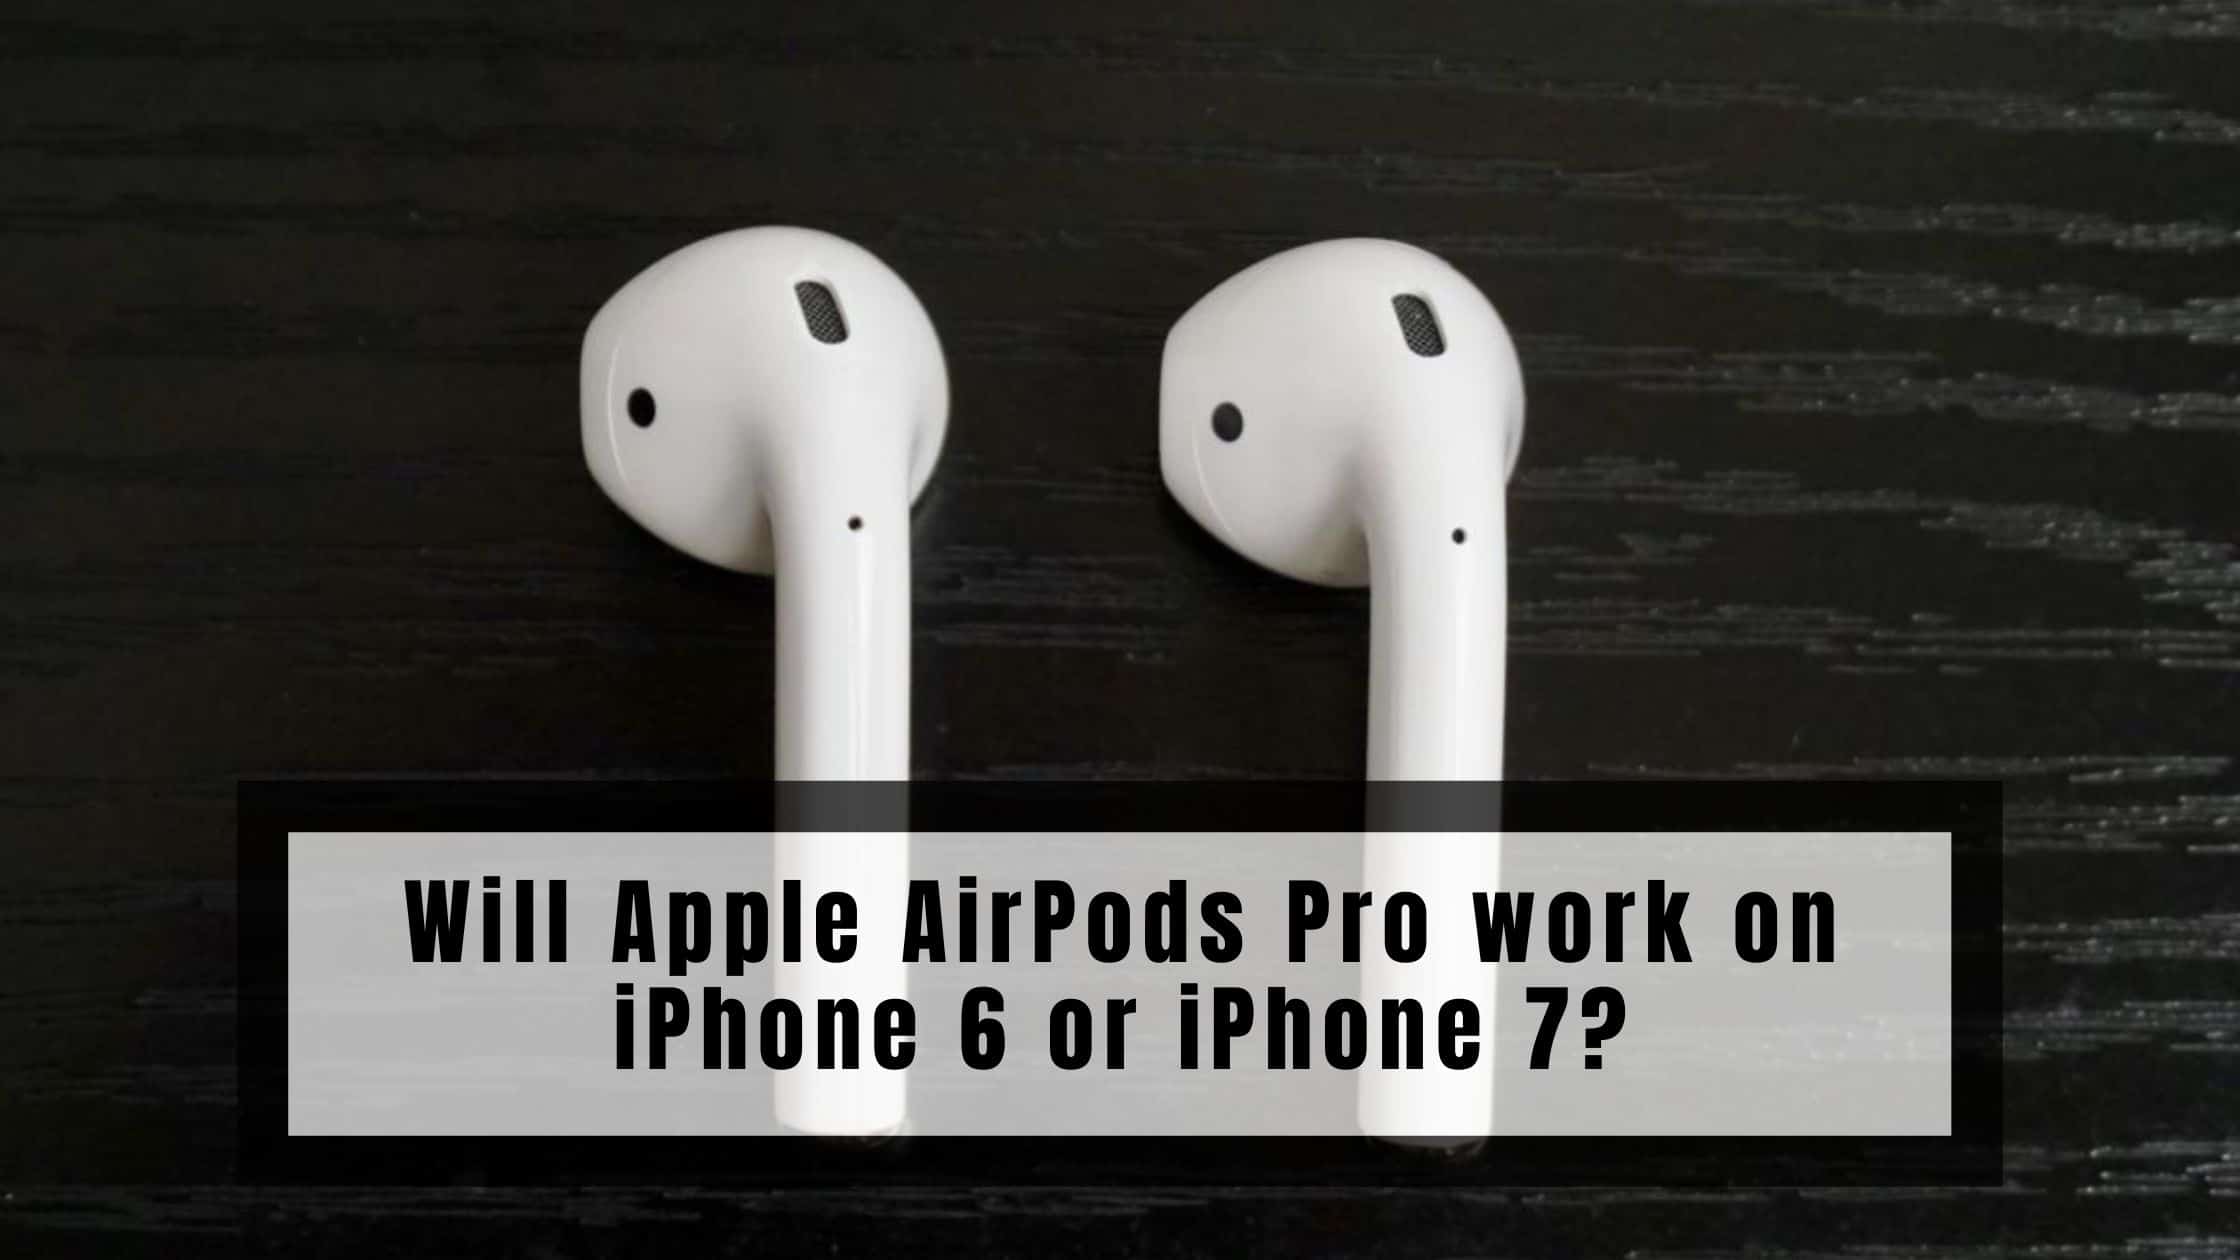 Will Apple AirPods Pro work on iPhone 6 or iPhone 7